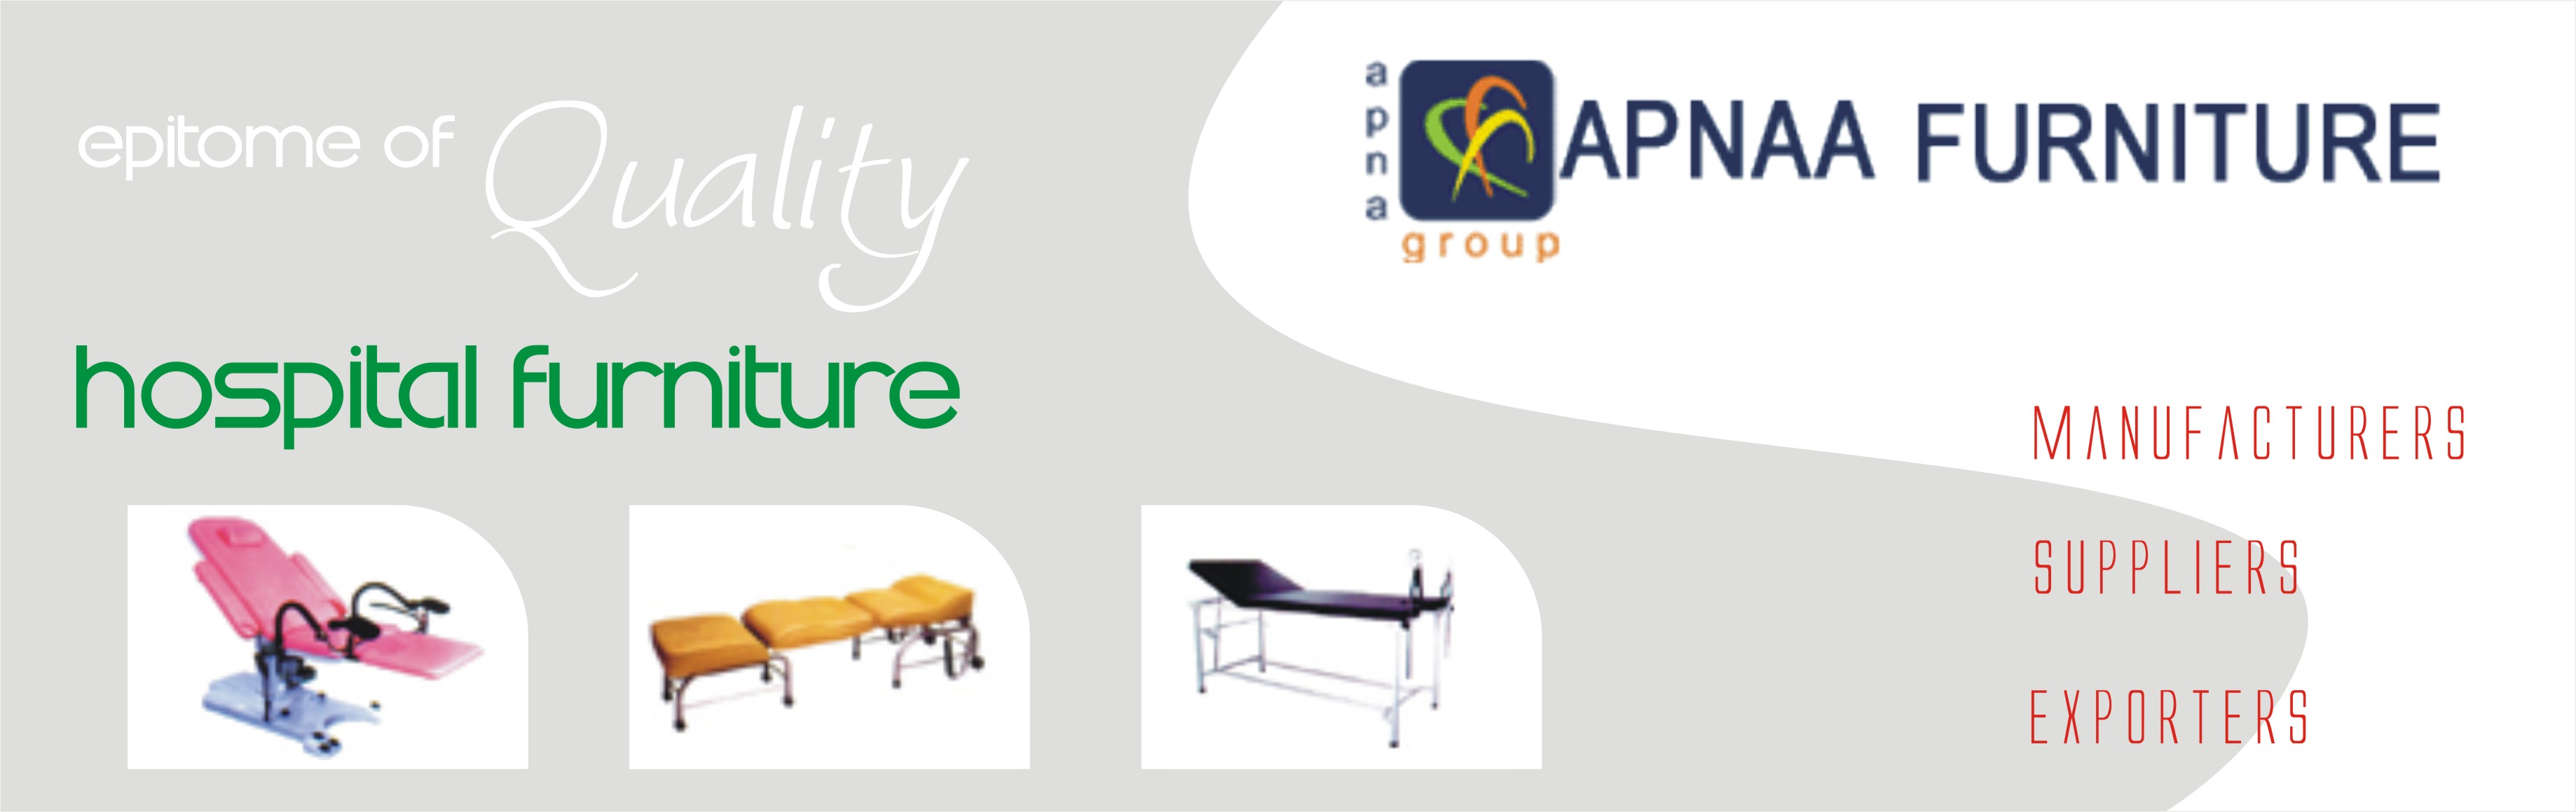 Hospital Furniture Manufacturers In India Major Suppliers Of